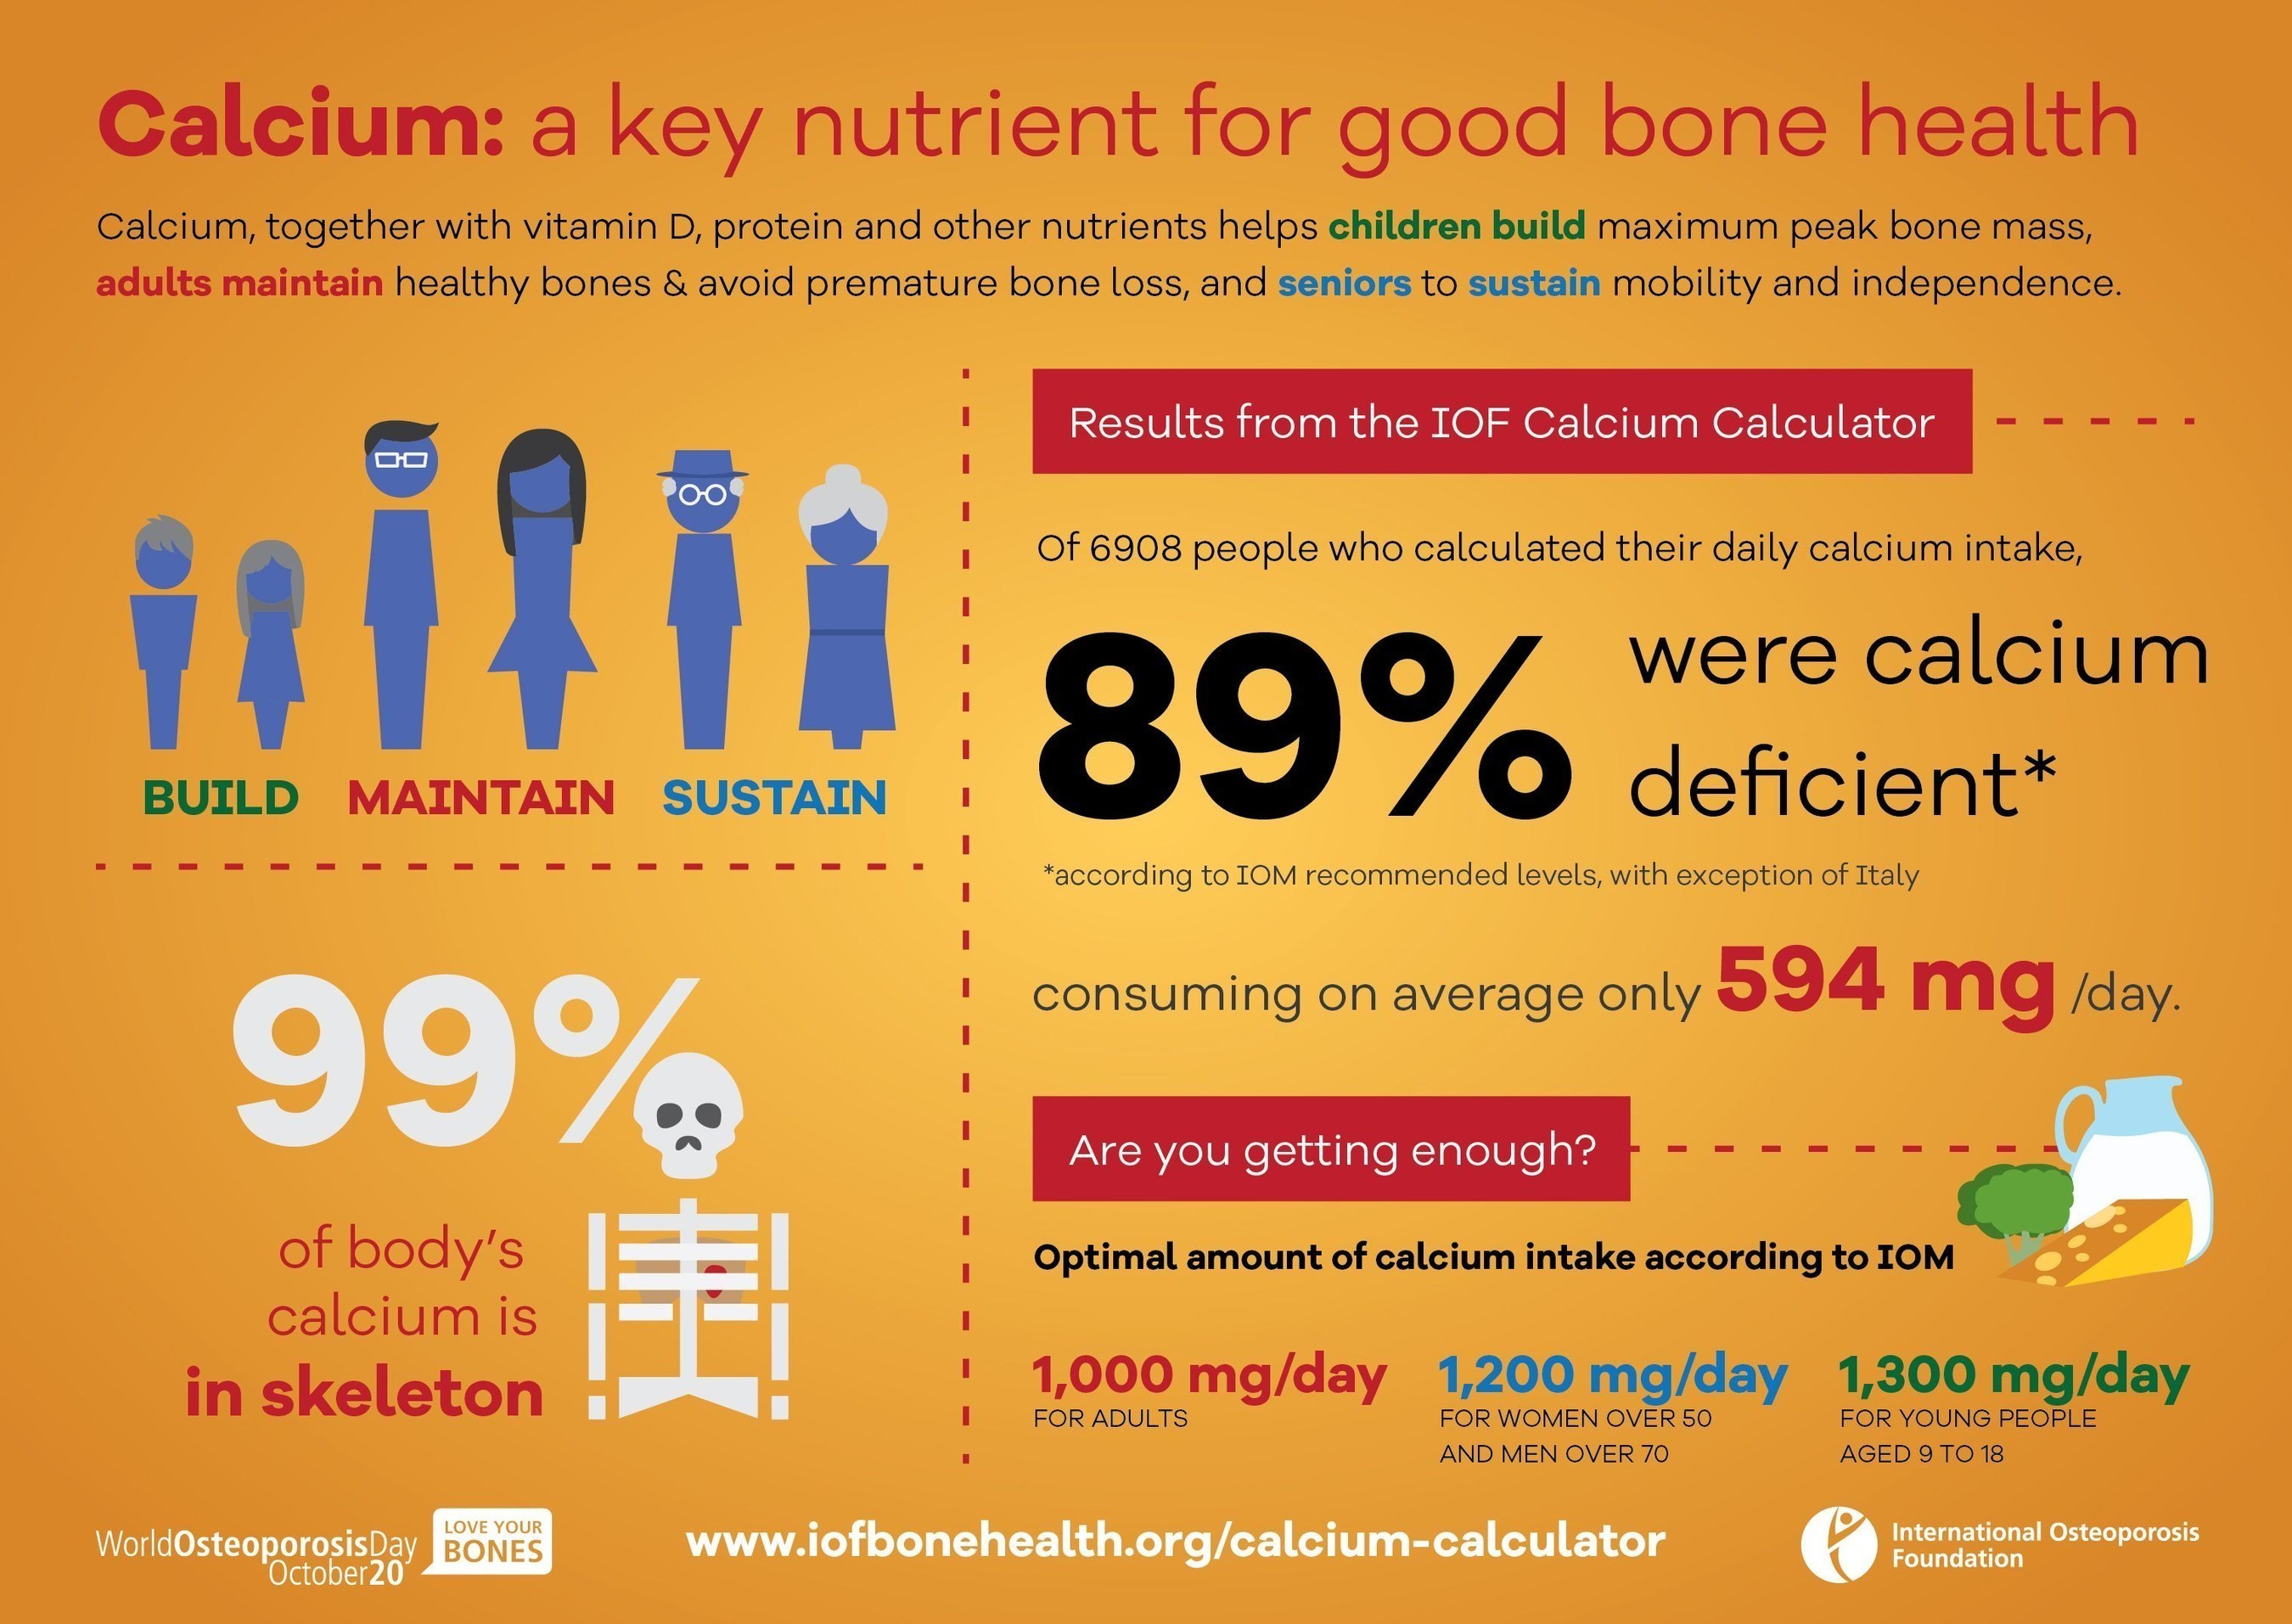 The International Osteoporosis Foundation (IOF) is concerned that people may not be getting enough calcium to maintain optimum bone health. As shown on this infographic, 89% of those who used the new IOF Calcium Calculator to assess their dietary calcium intake were found to be deficient in this important mineral. The calculator, available at  www.iobonehealth.org or as an APP, helps people calculate their approximate daily calcium intake based on their typical weekly diet. (PRNewsFoto/IOF) (PRNewsFoto/IOF)